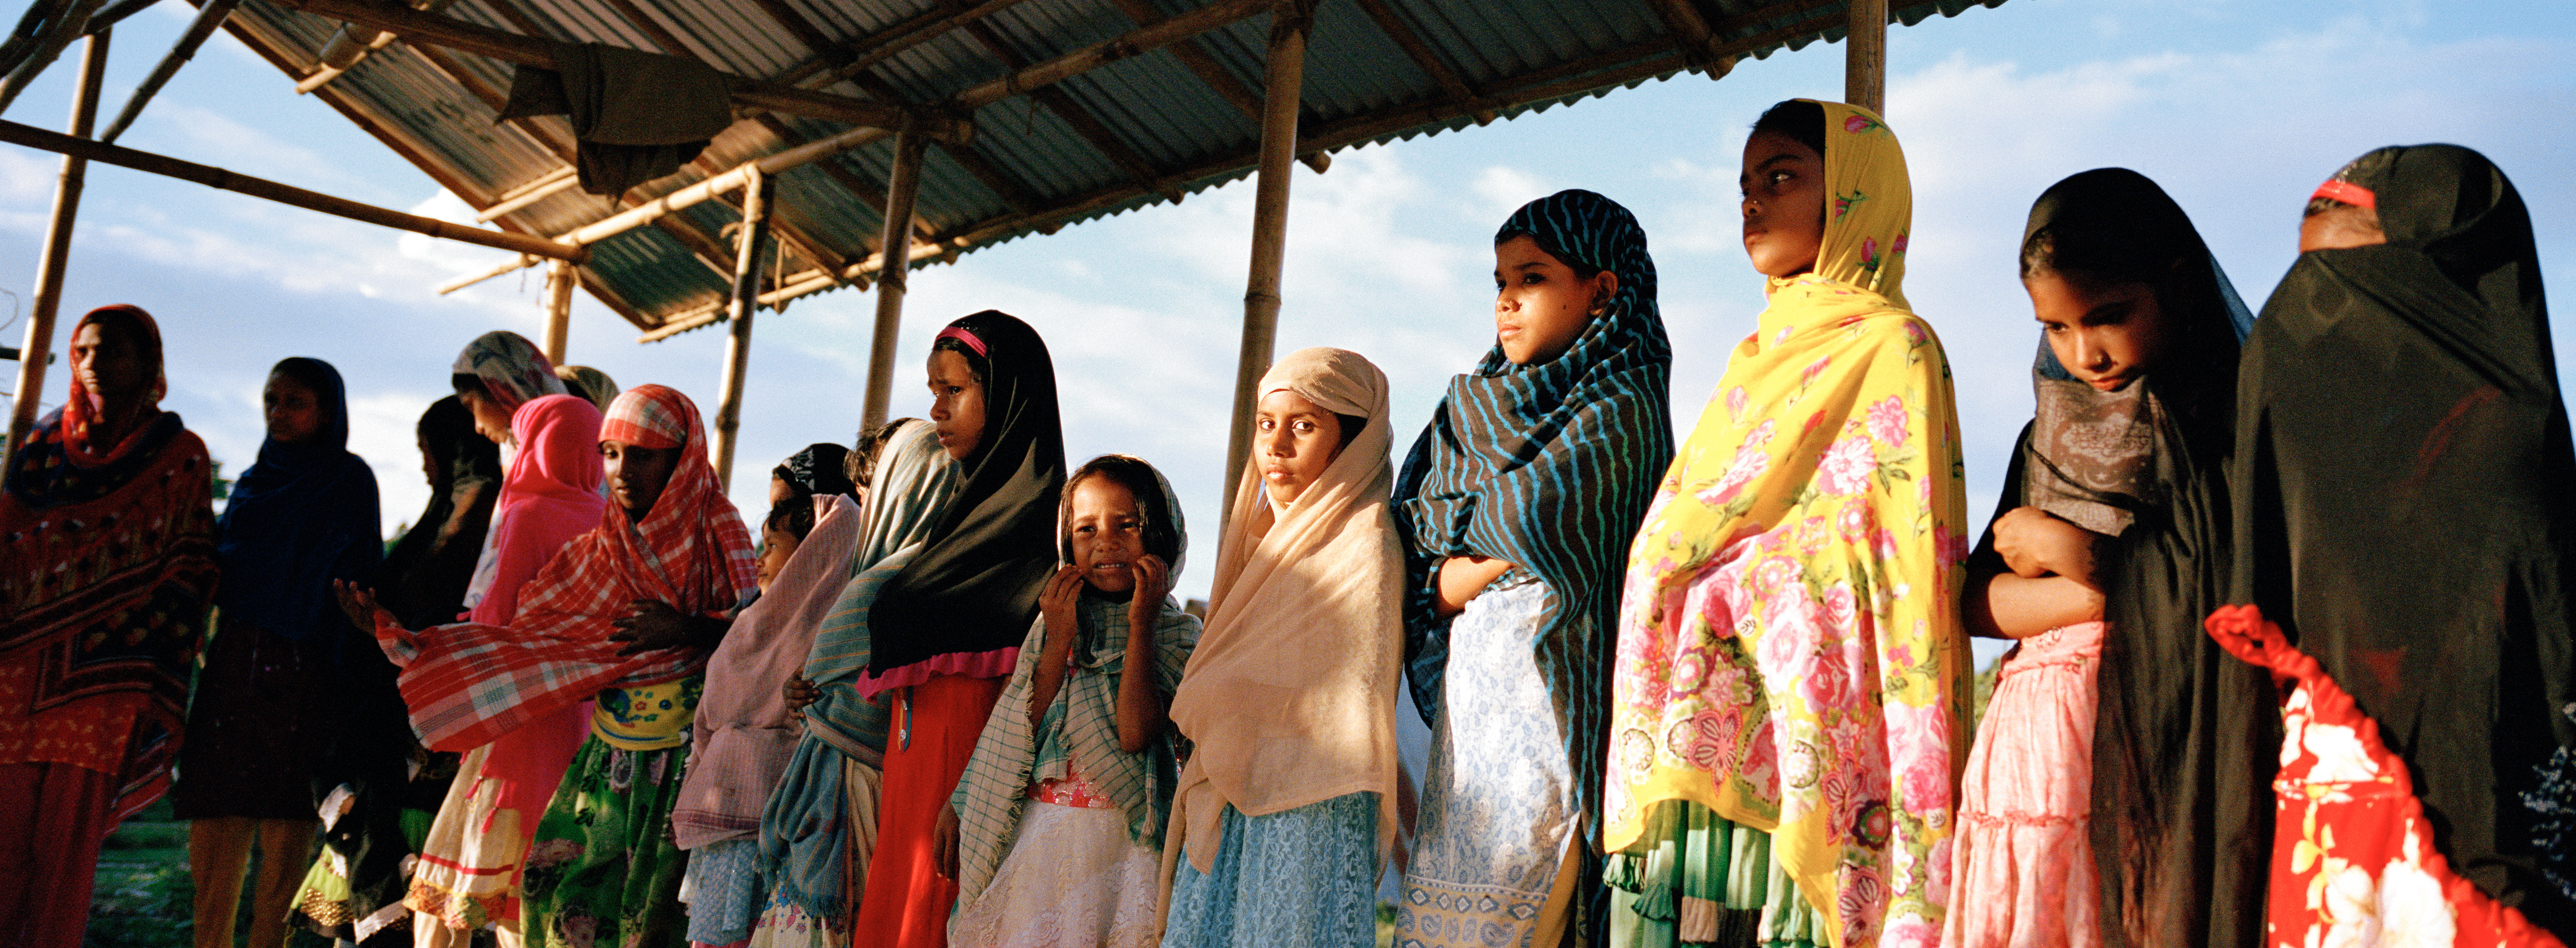 Young women, uprooted by river erosion and presently living in a camp for displaced persons, sing hymns at a widely-attended after-school program. The program is the only opportunity for people in the camp to practice Islam as a community.